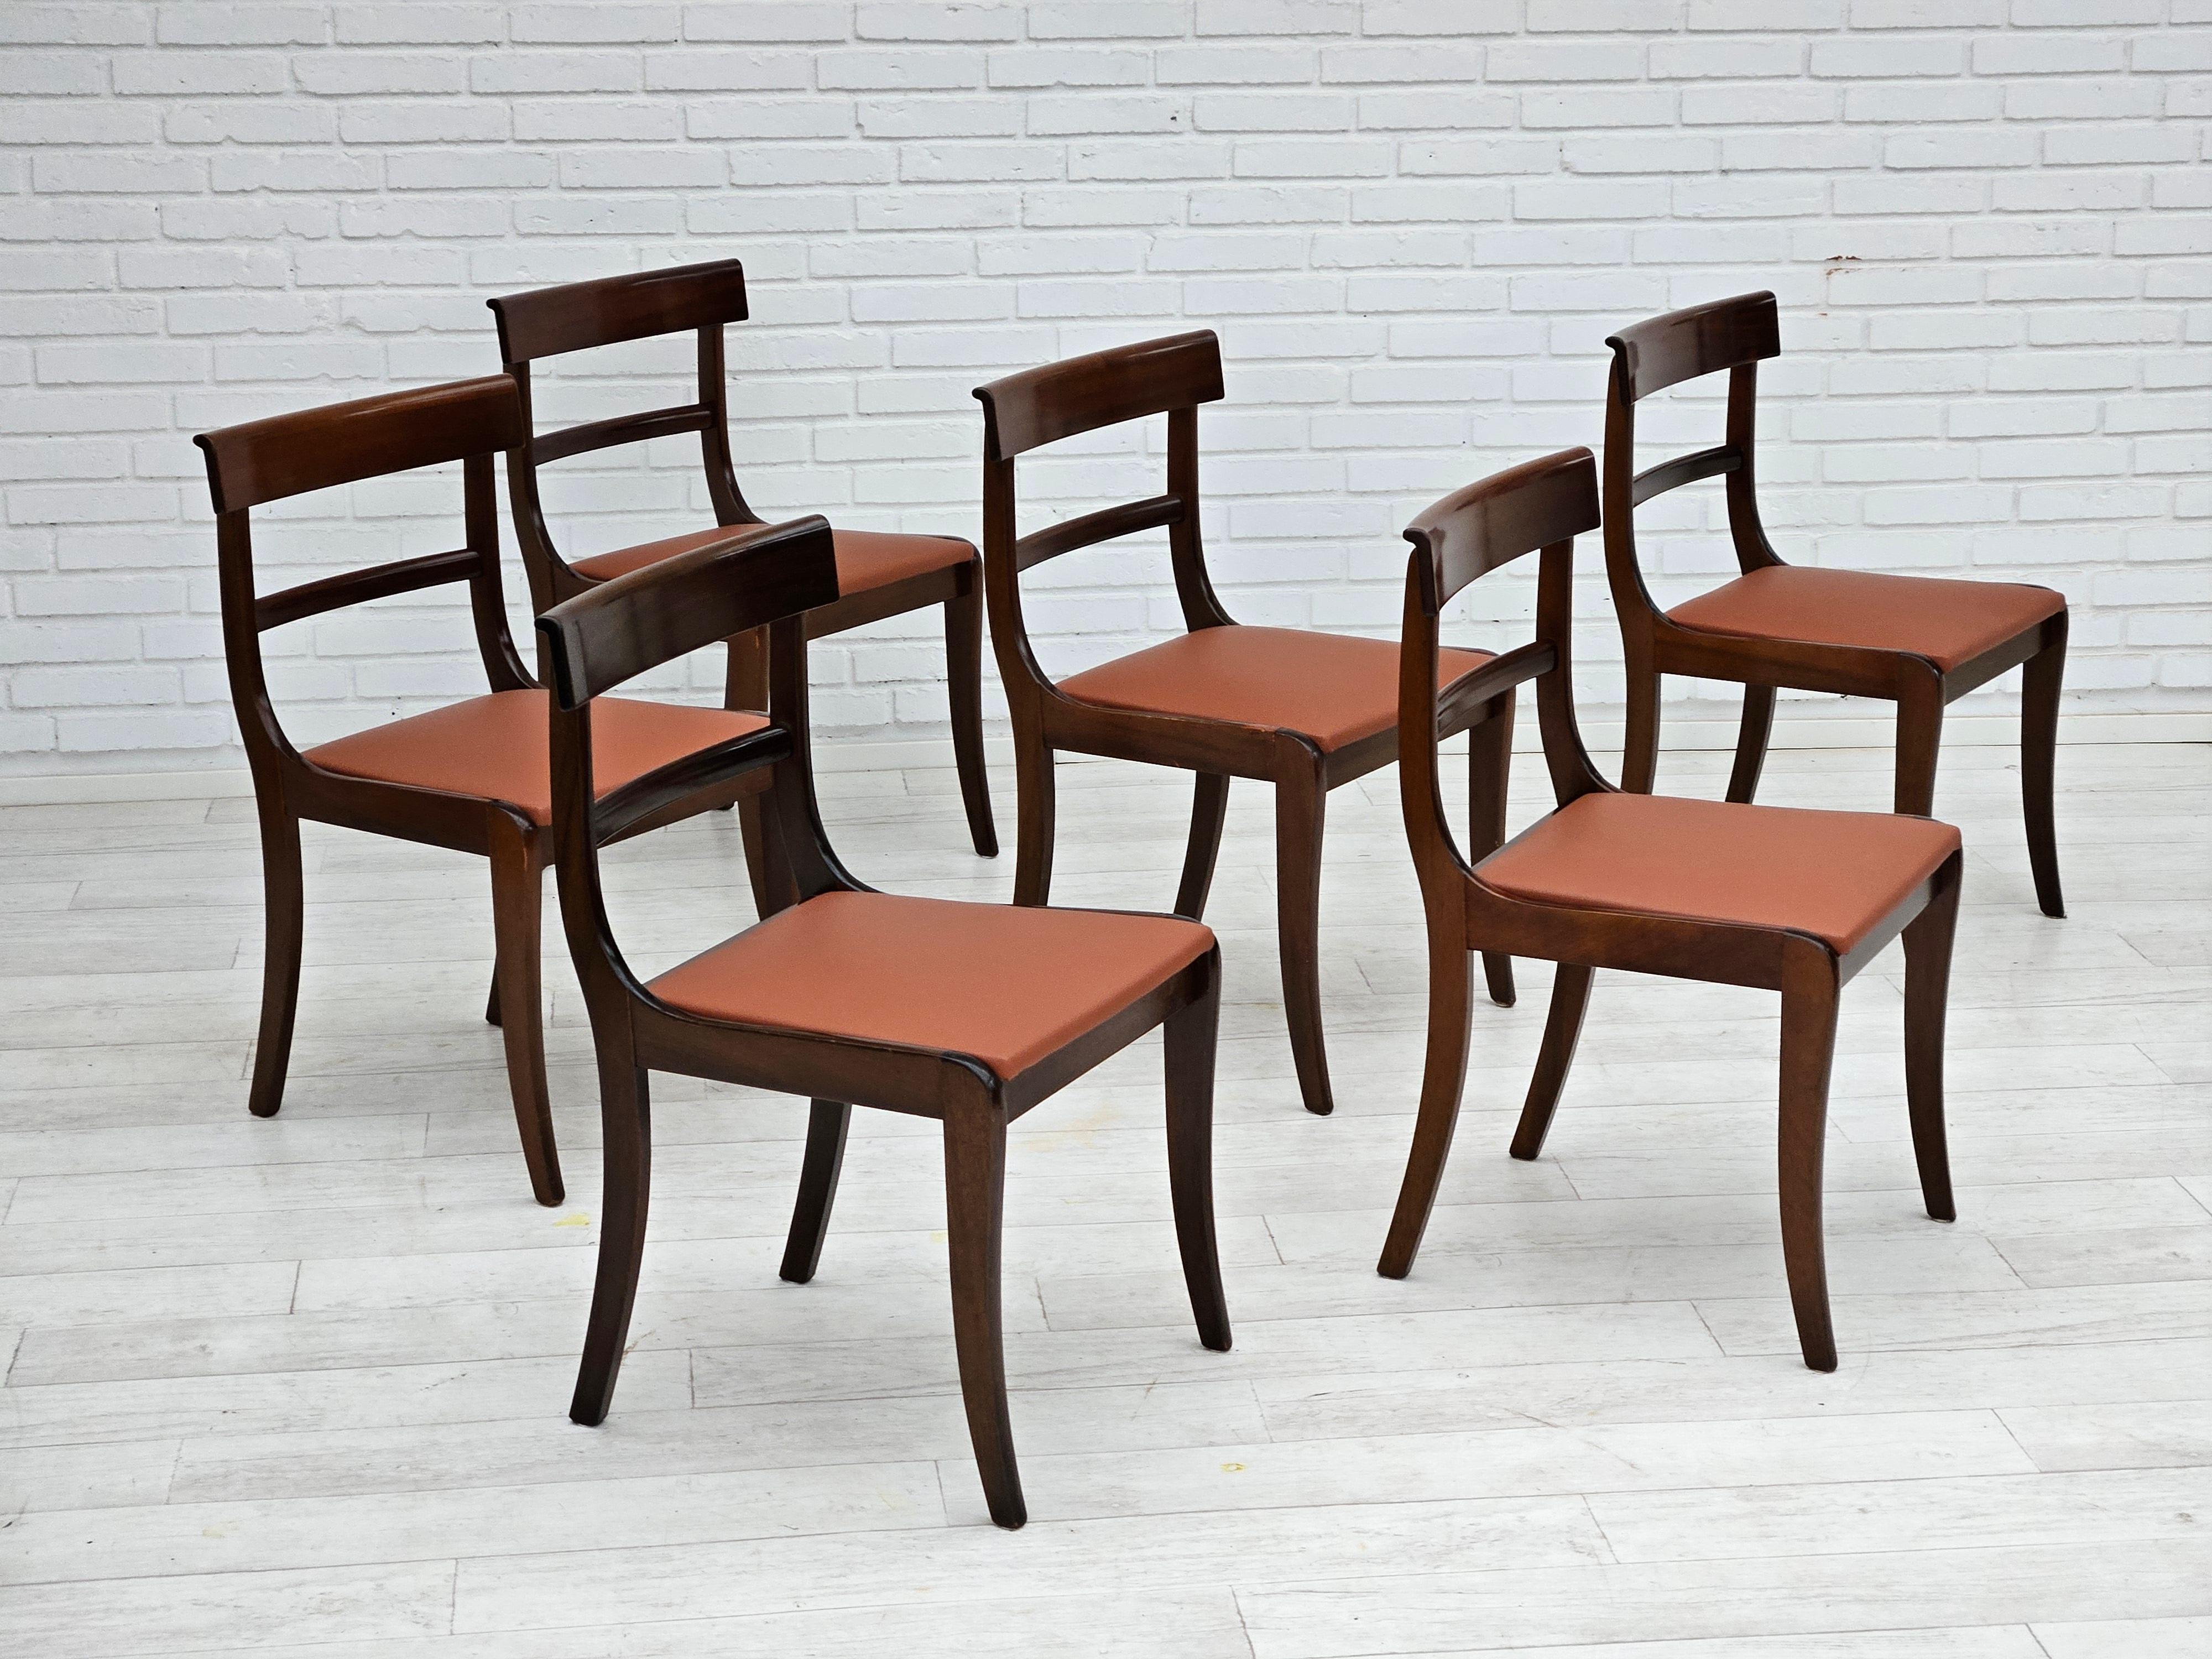 1970s, reupholstered set of 6 pcs Danish dining chairs. Lacquered teak wood, camel brown leather. Design by E.Rogild, manufactured by Danish furniture manufacturer Ørum Stolefabrik in about 1970s. Reupholstered by craftsman.